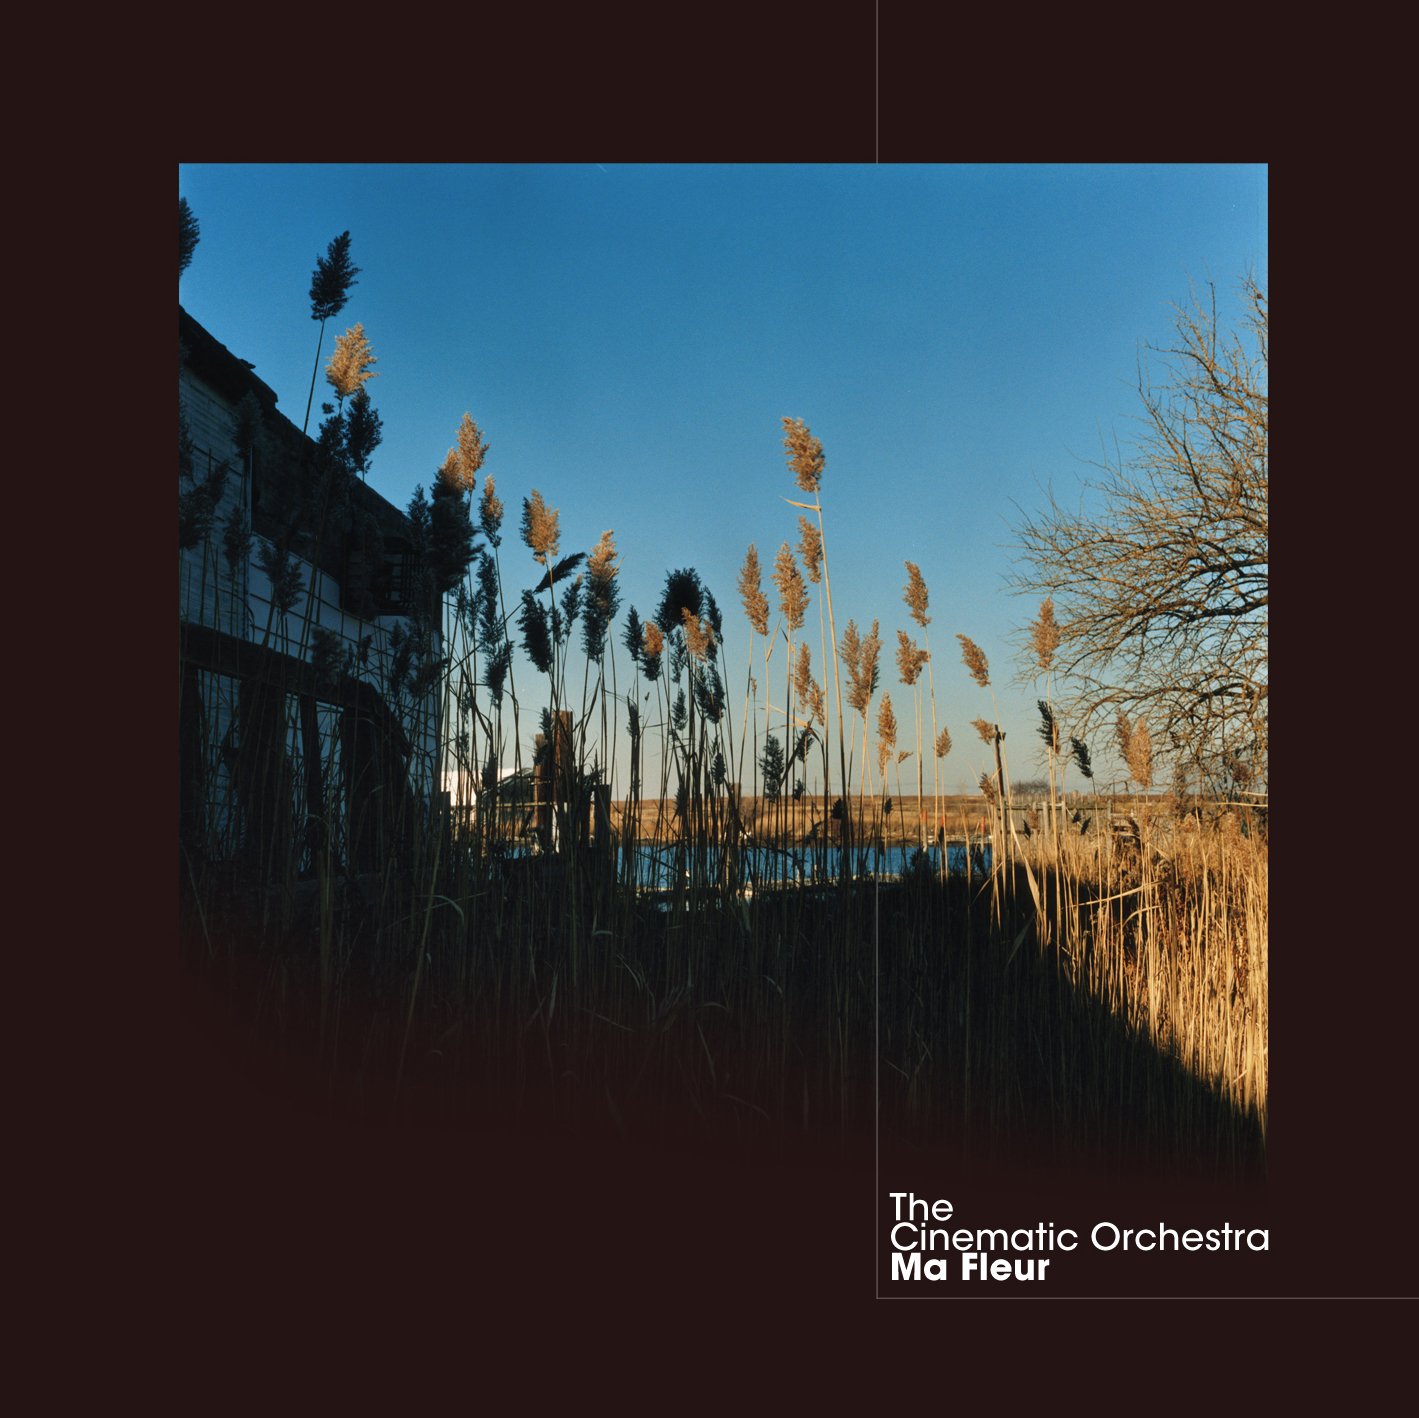 The cinematic orchestra to build a home. Cinematic Orchestra "ma fleur". The Cinematic Orchestra. Группа the Cinematic Orchestra. Cinematic Orchestra винил.